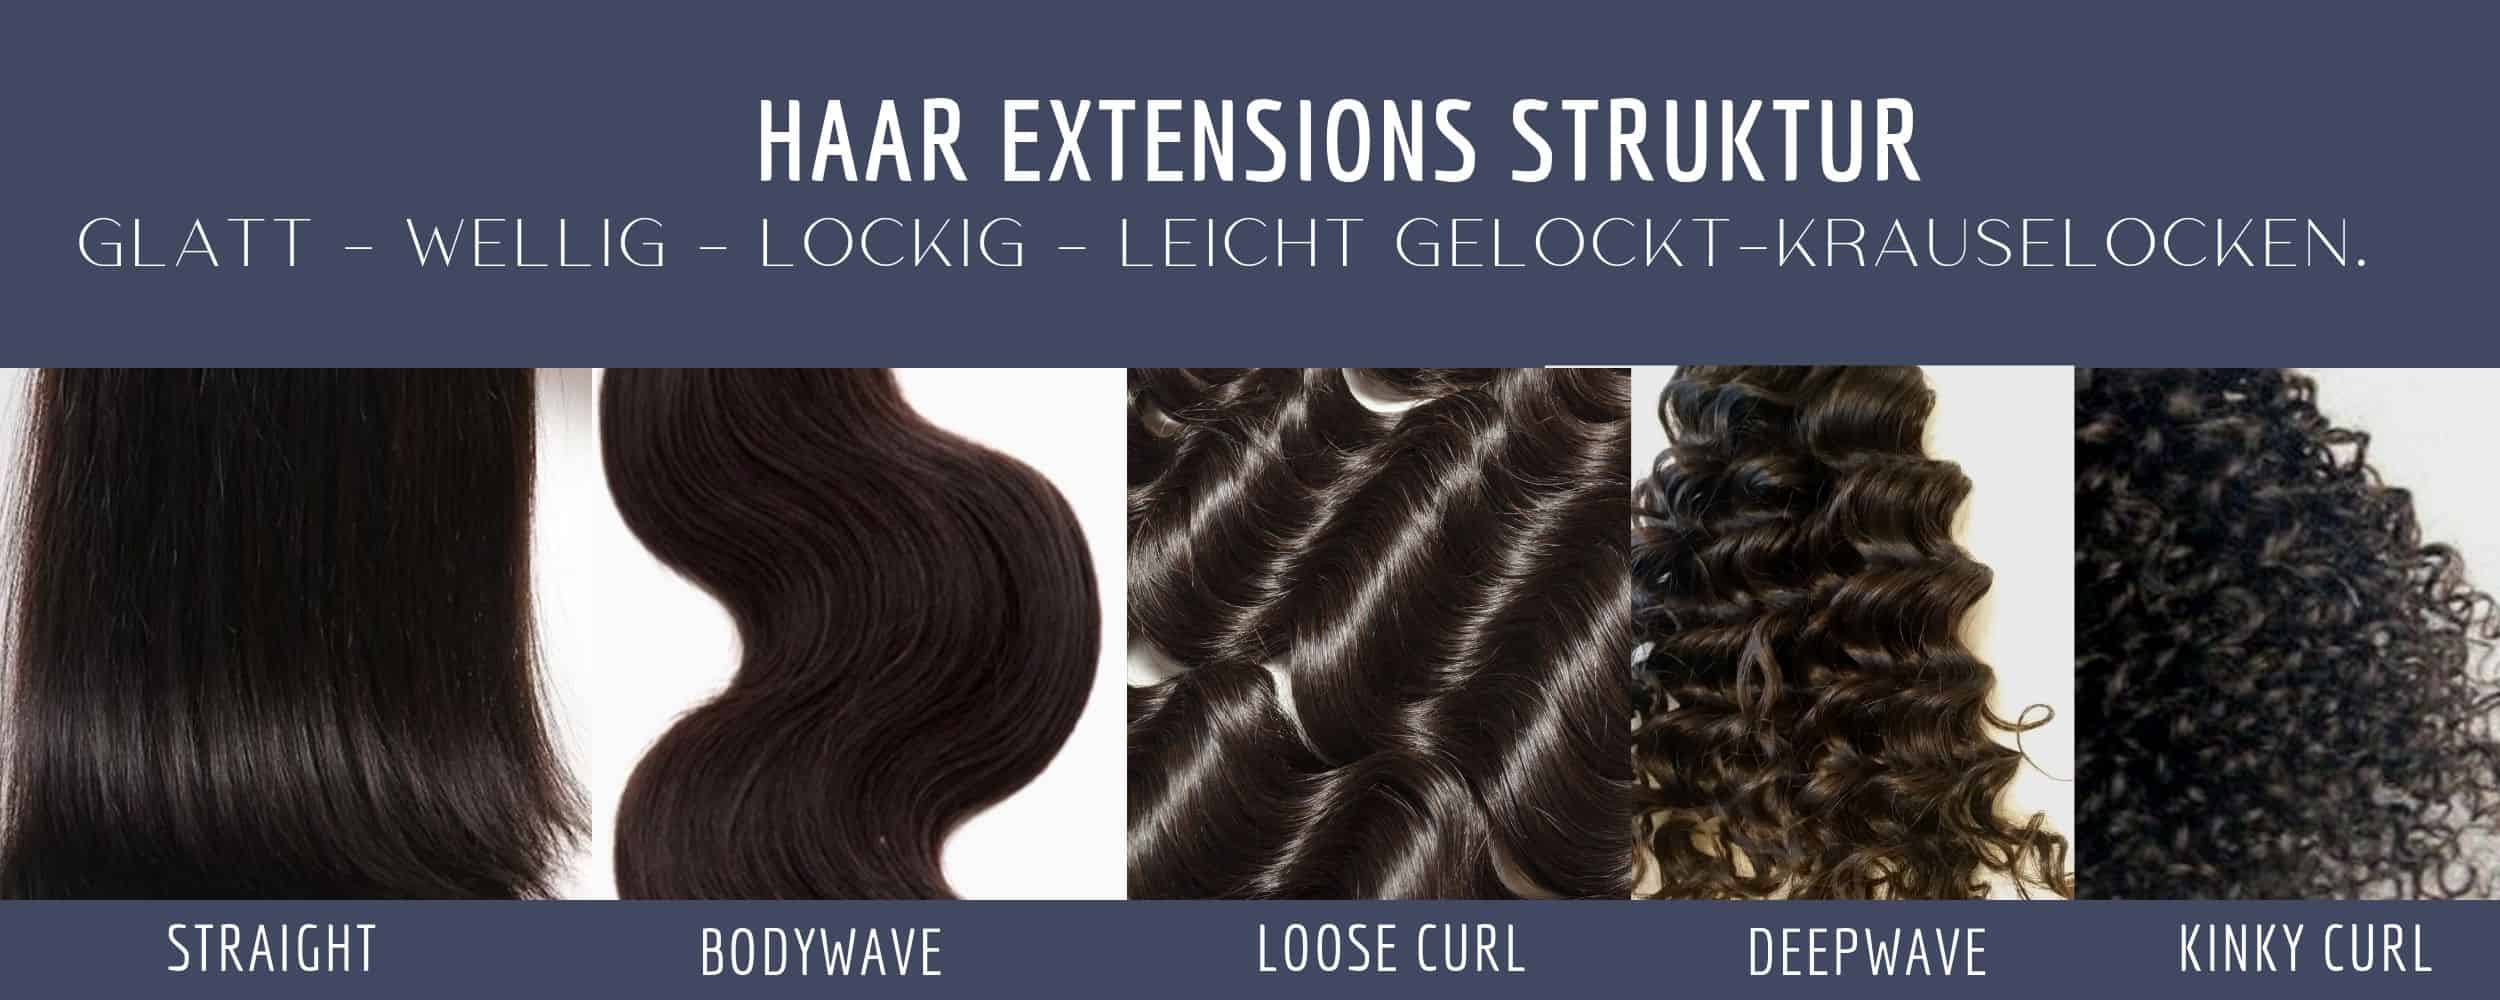 Hair extensions structures